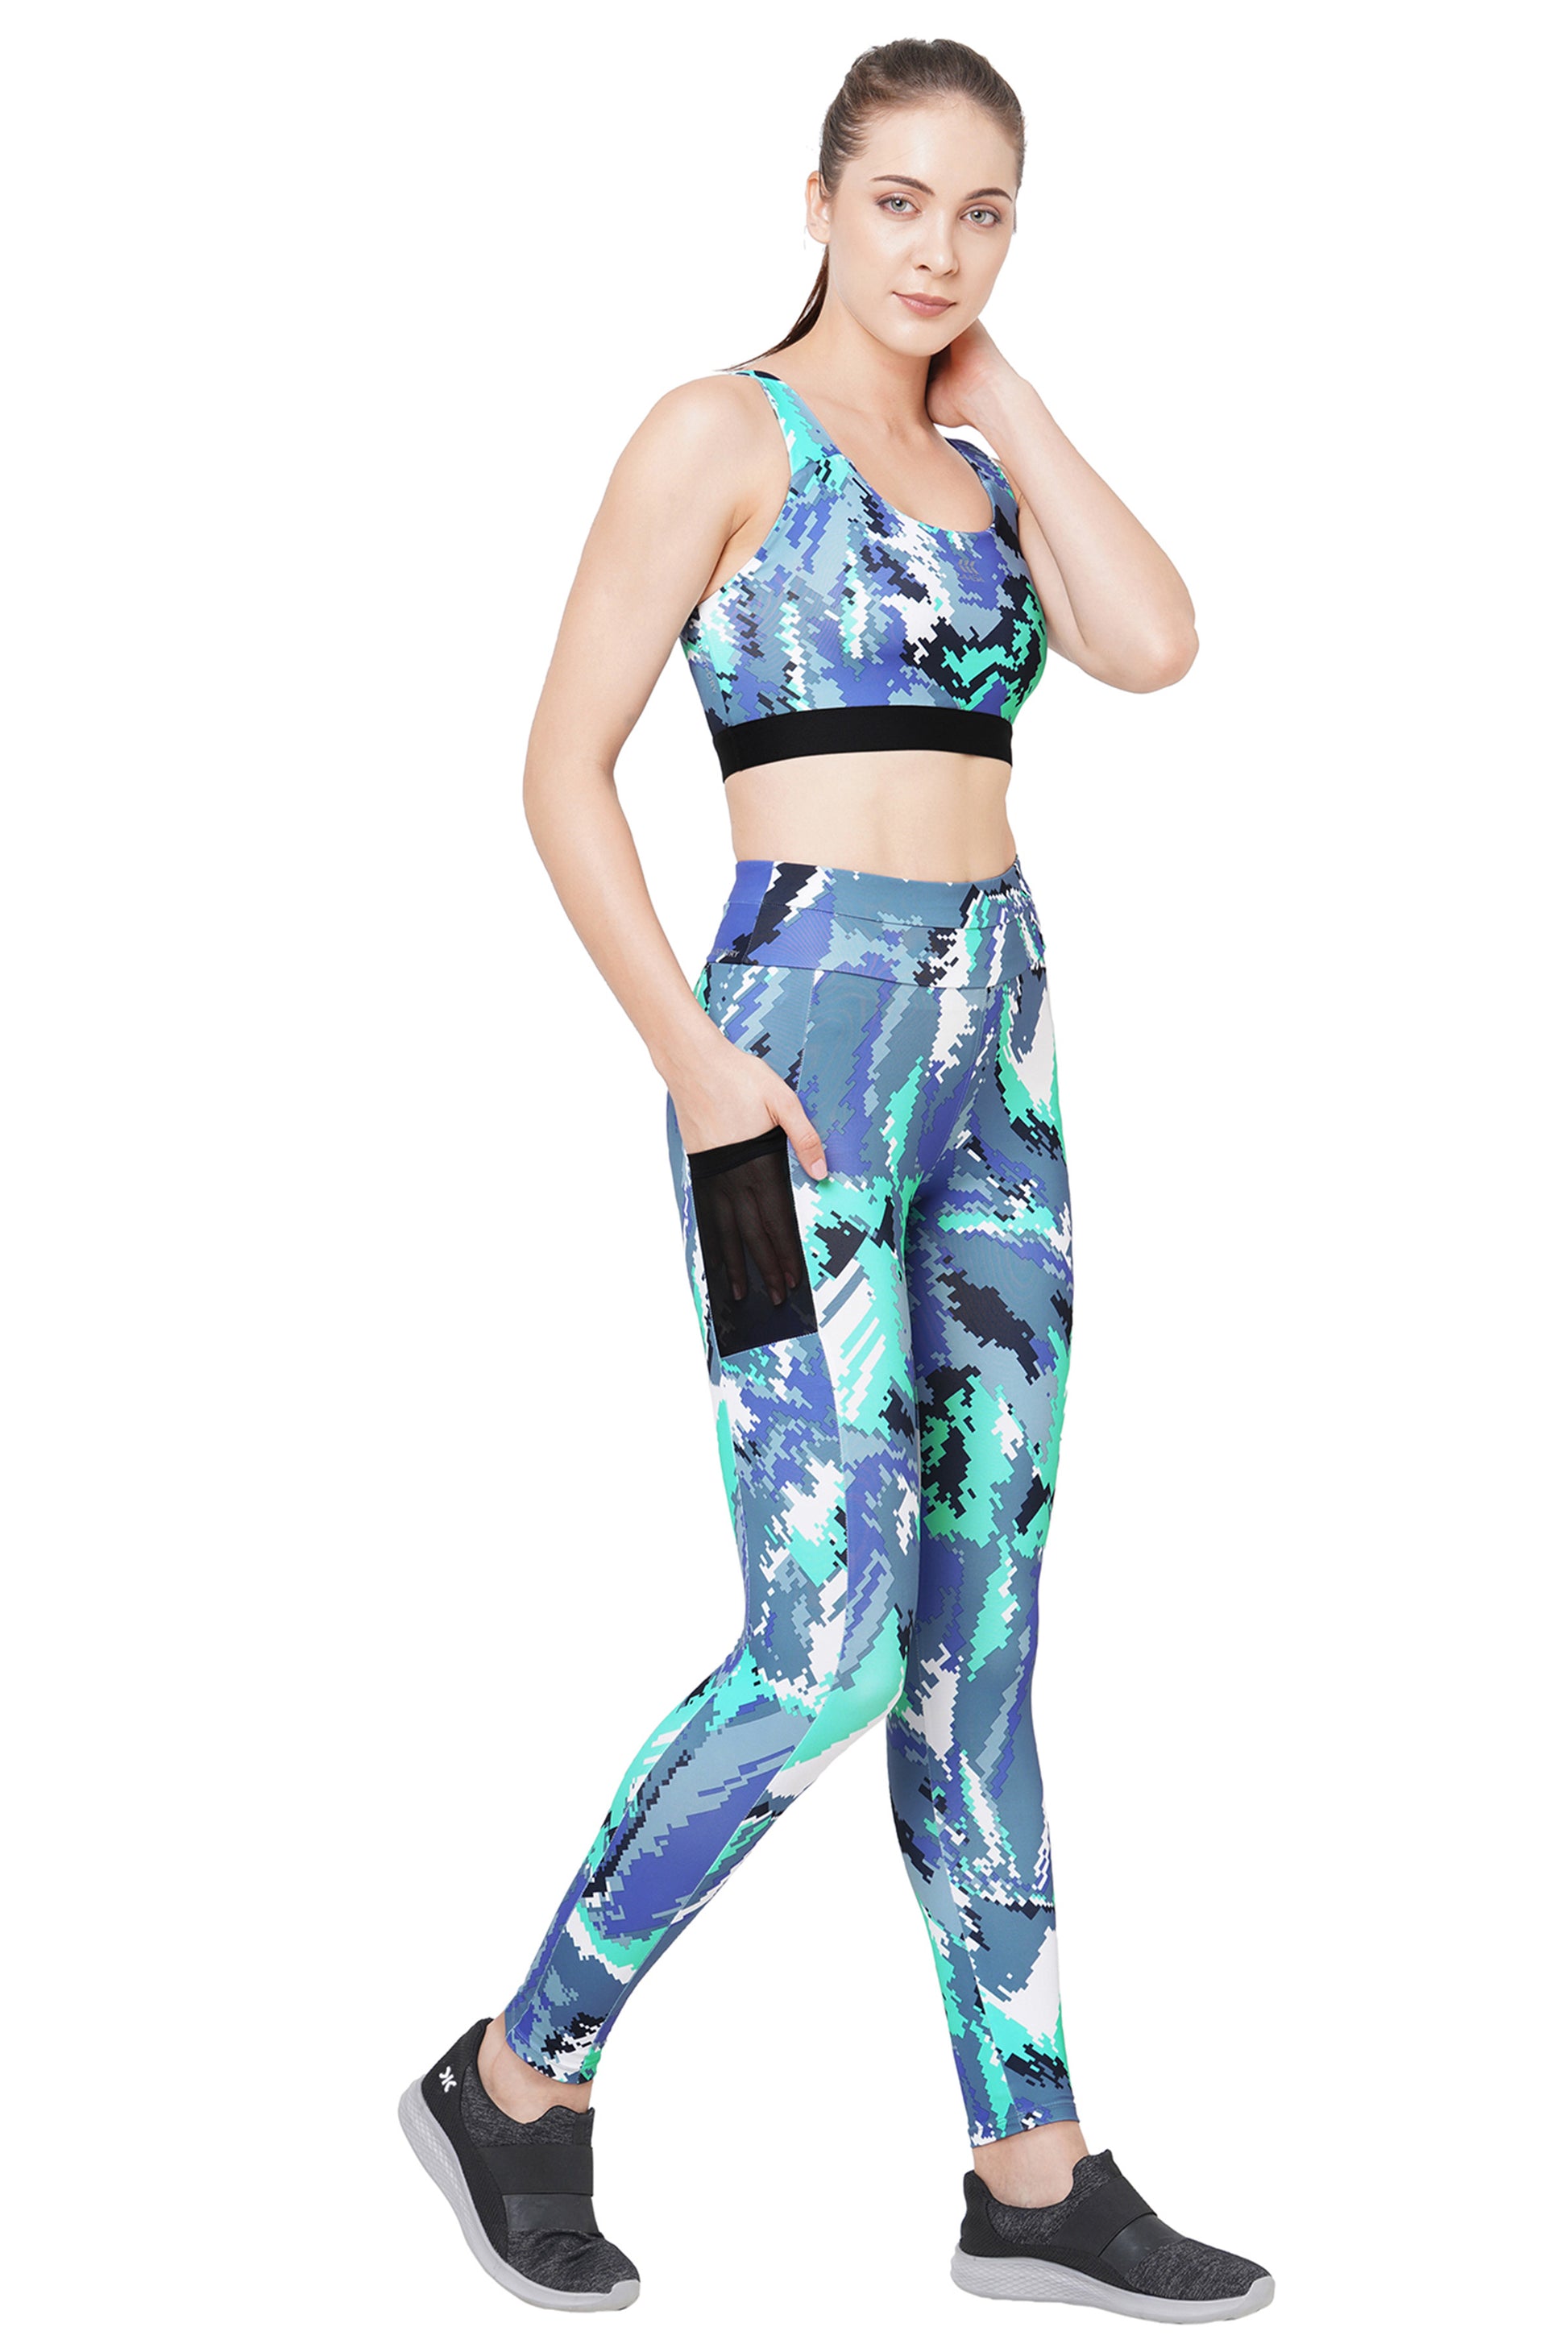 JUST-DRY SEA SALT GREEN 3/4 CAMO PRINTED MESH WORKOUT, 50% OFF